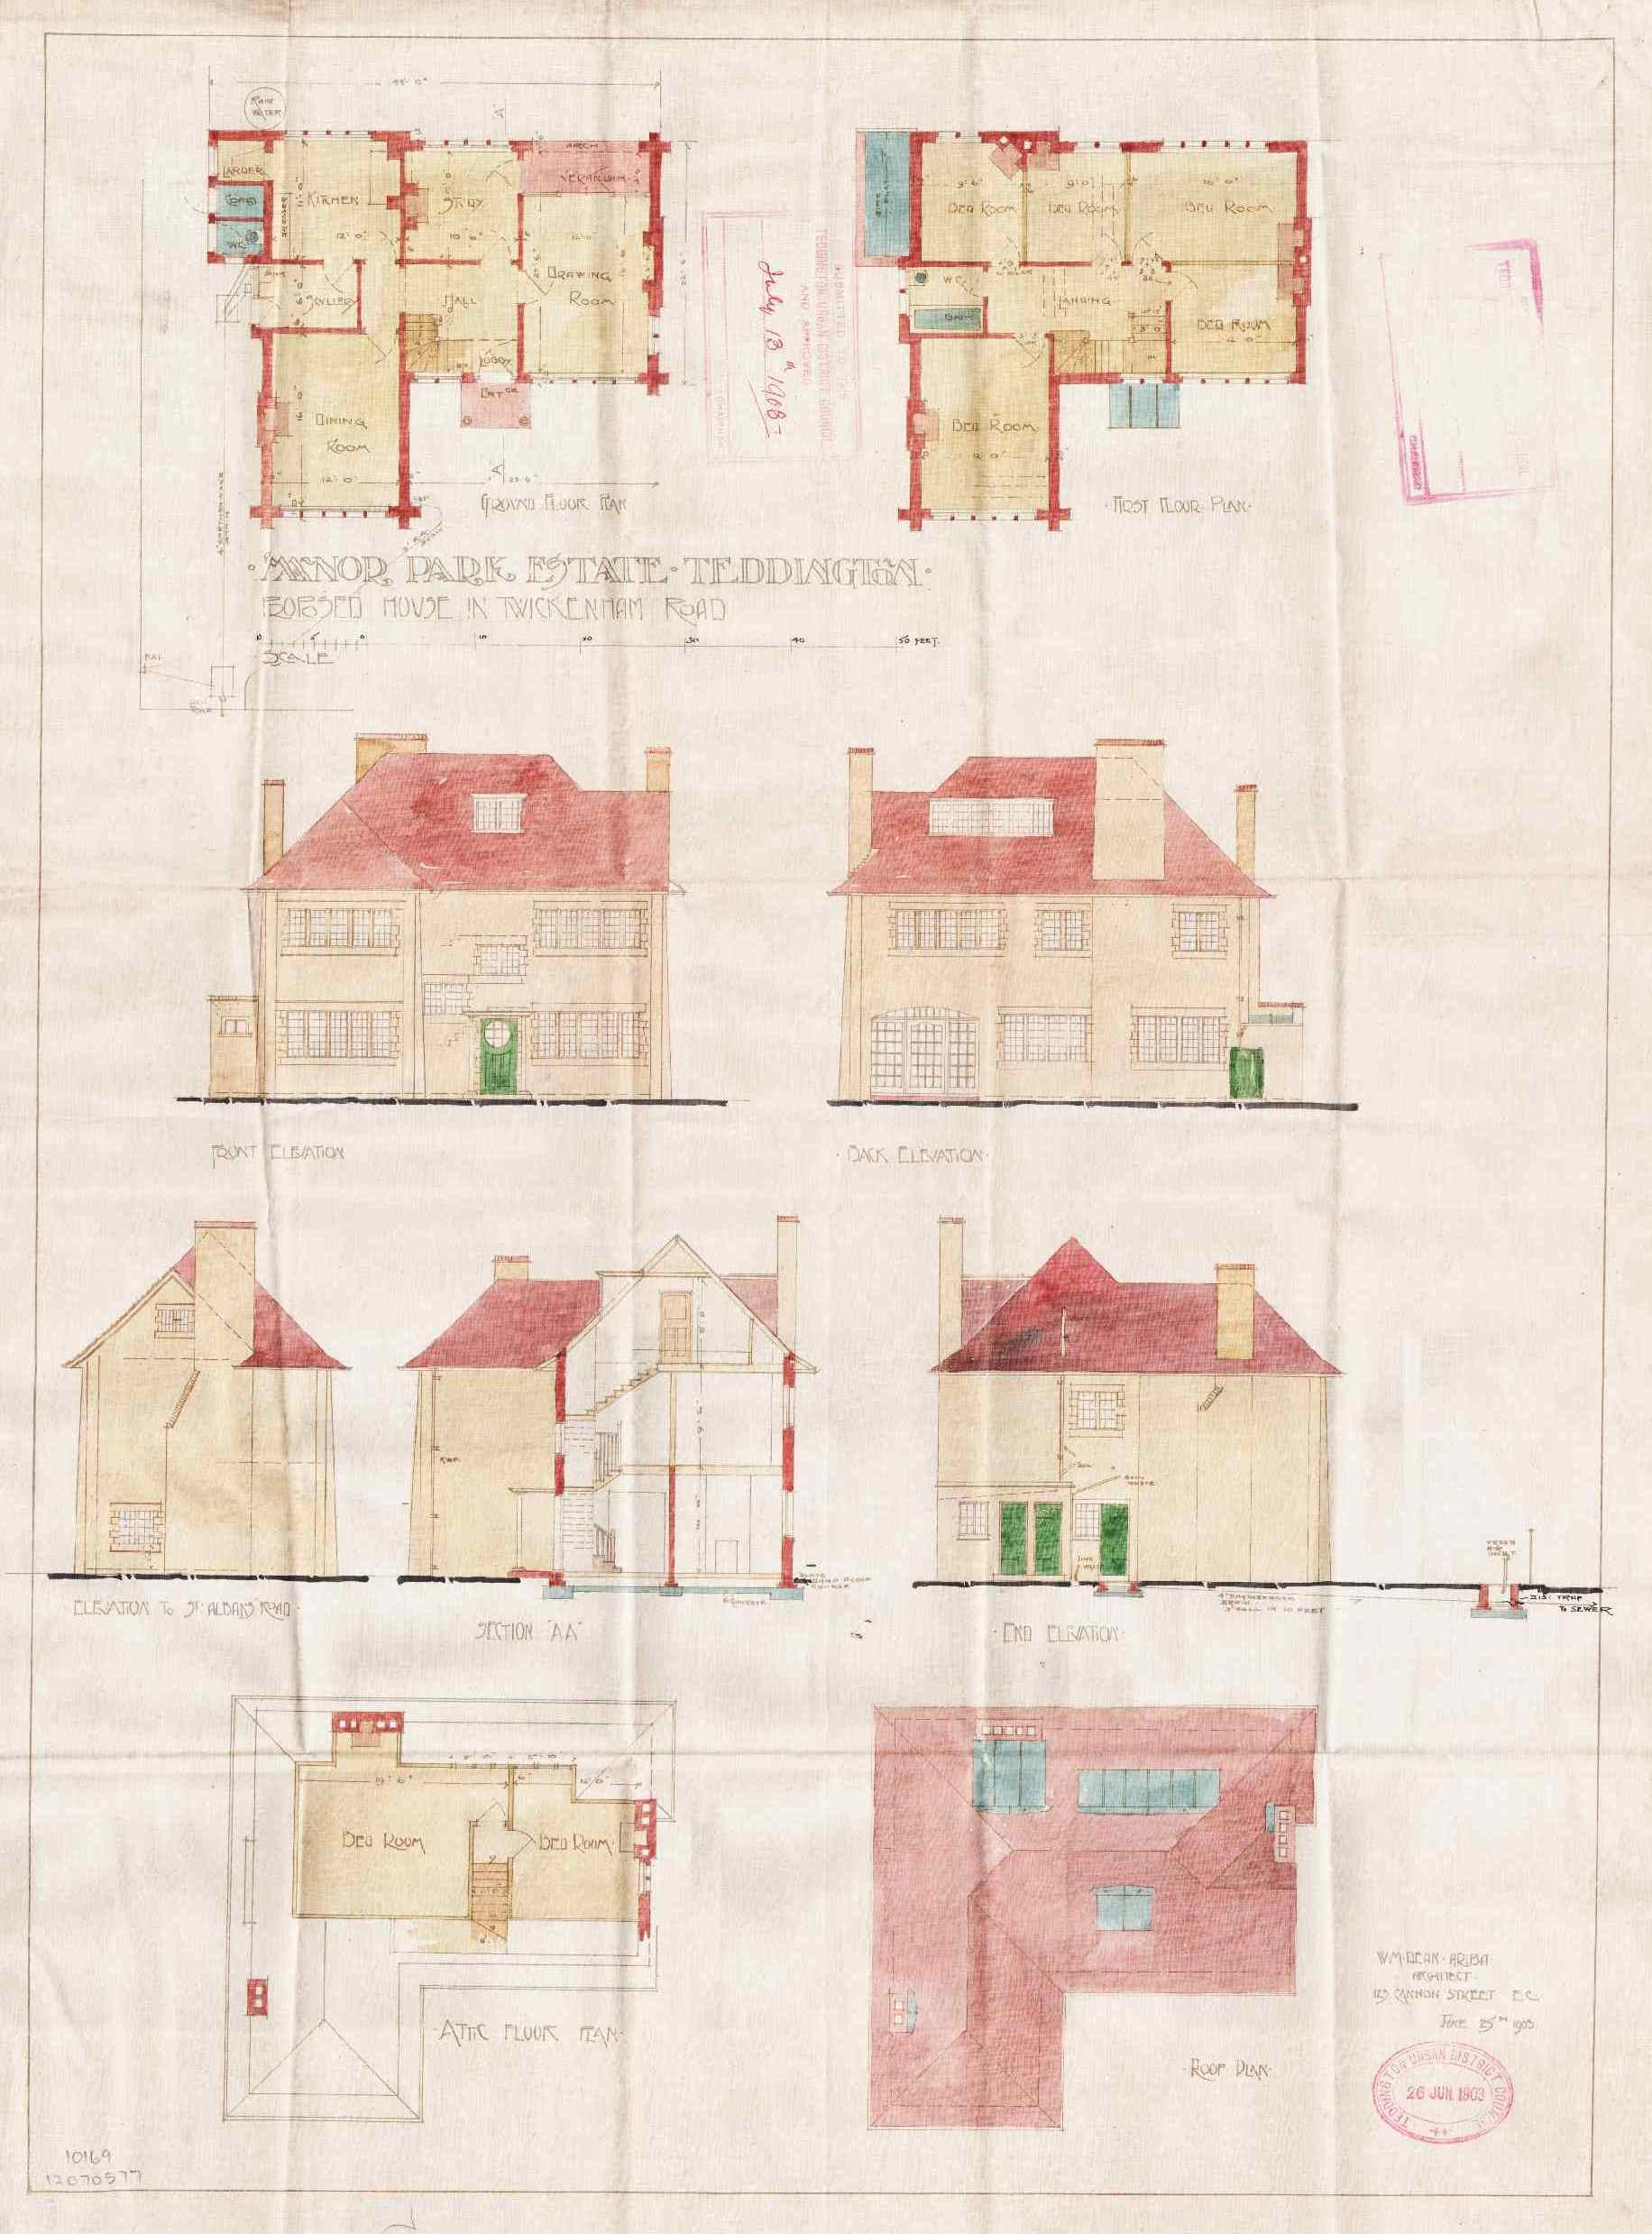 Figure 11 Architectural drawing of 7 Twickenham Road by W M Dean 1903